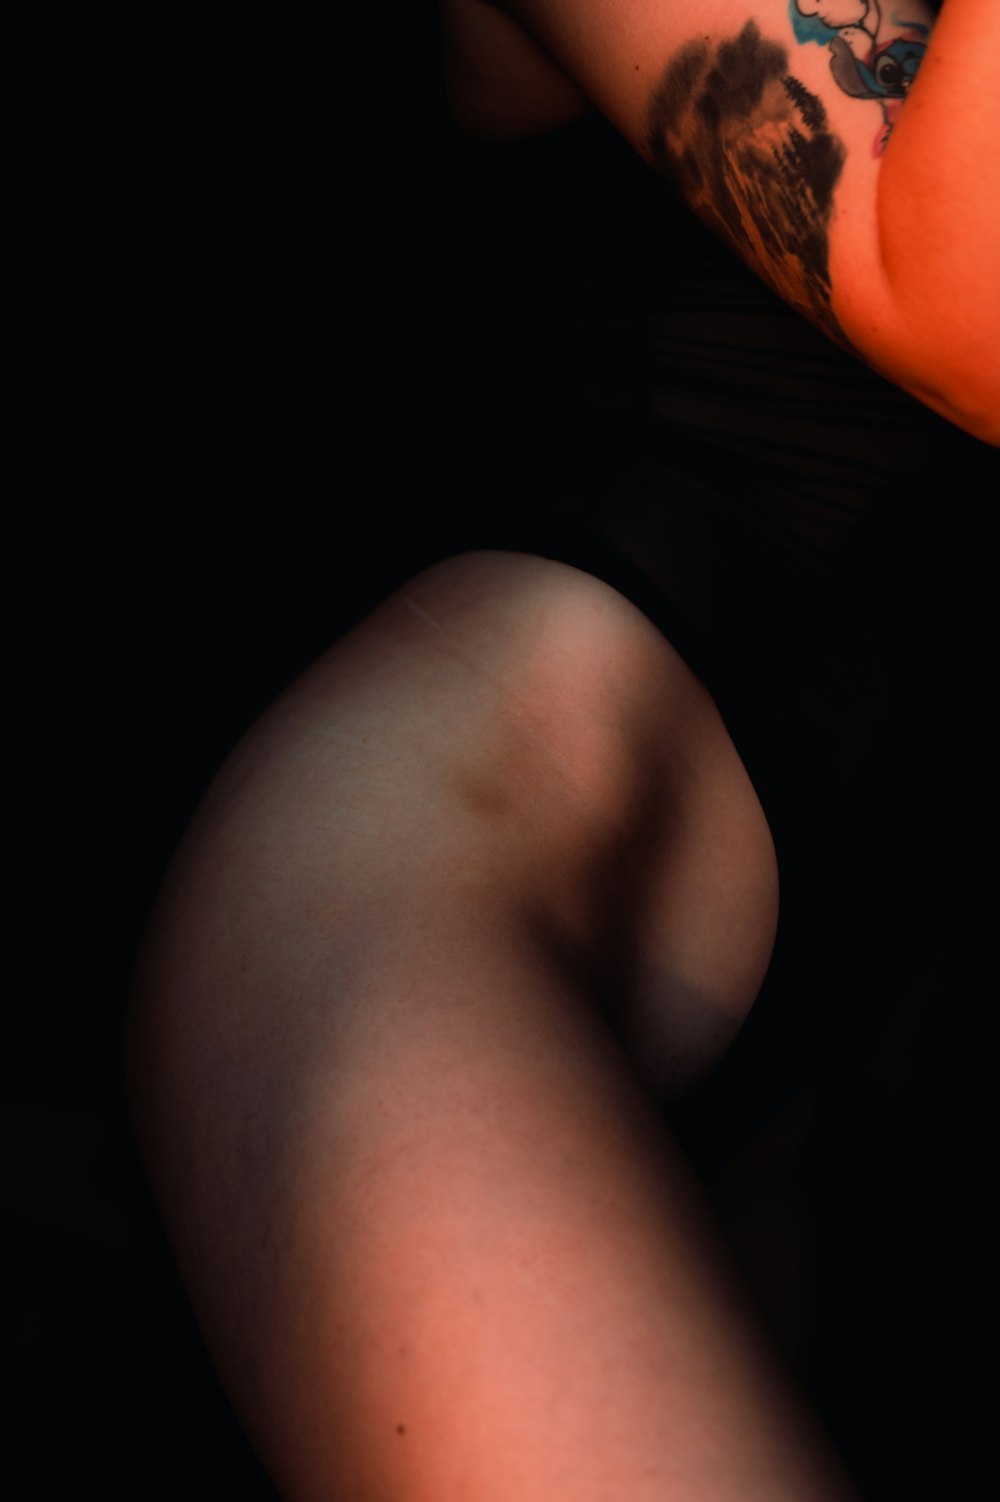 a close up of a person's leg